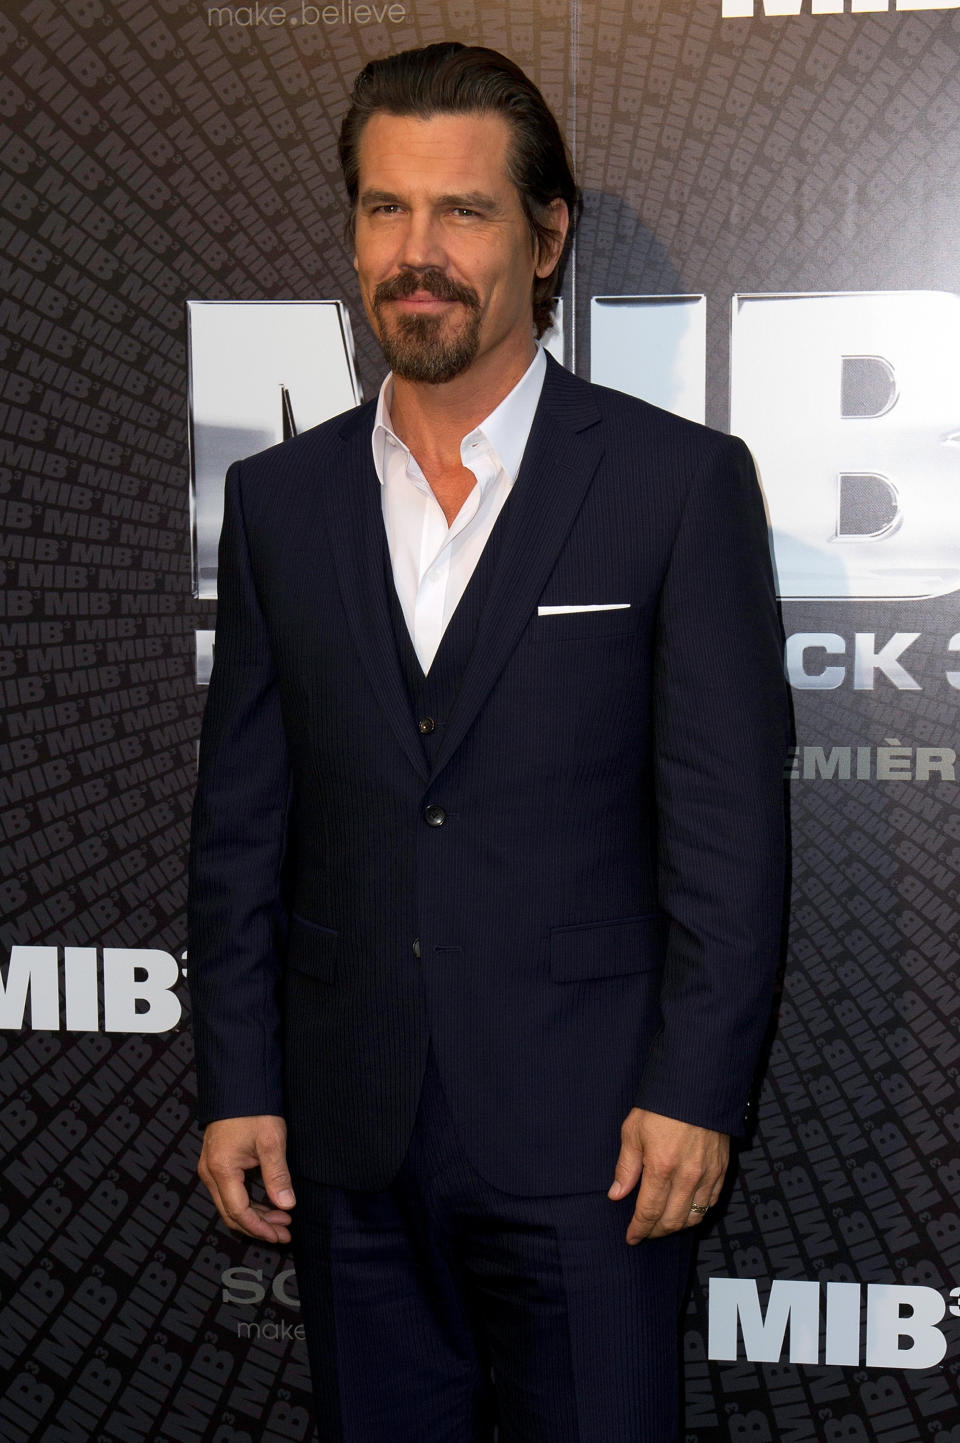 PARIS, FRANCE - MAY 11: Josh Brolin attends the 'Men In Black 3' European Premiere at Le Grand Rex on May 11, 2012 in Paris, France. (Photo by Kristy Sparow/Getty Images)